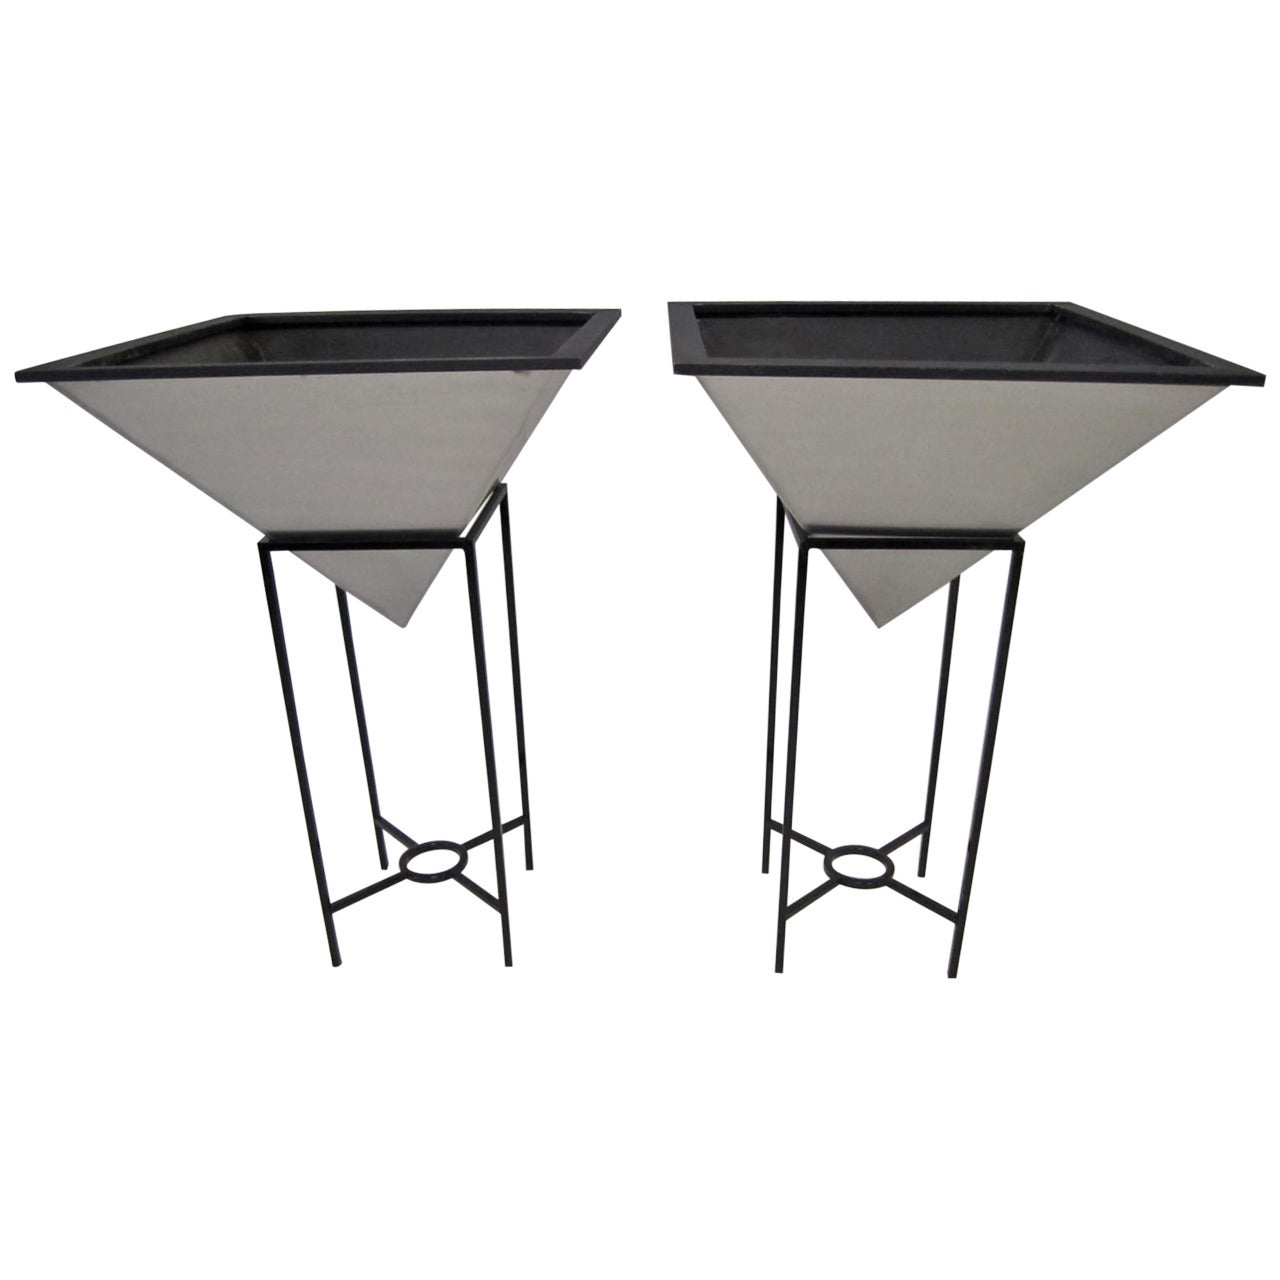 Oversized Inverted Pyramid Planters on Iron Stands Mid-Century Modern For Sale